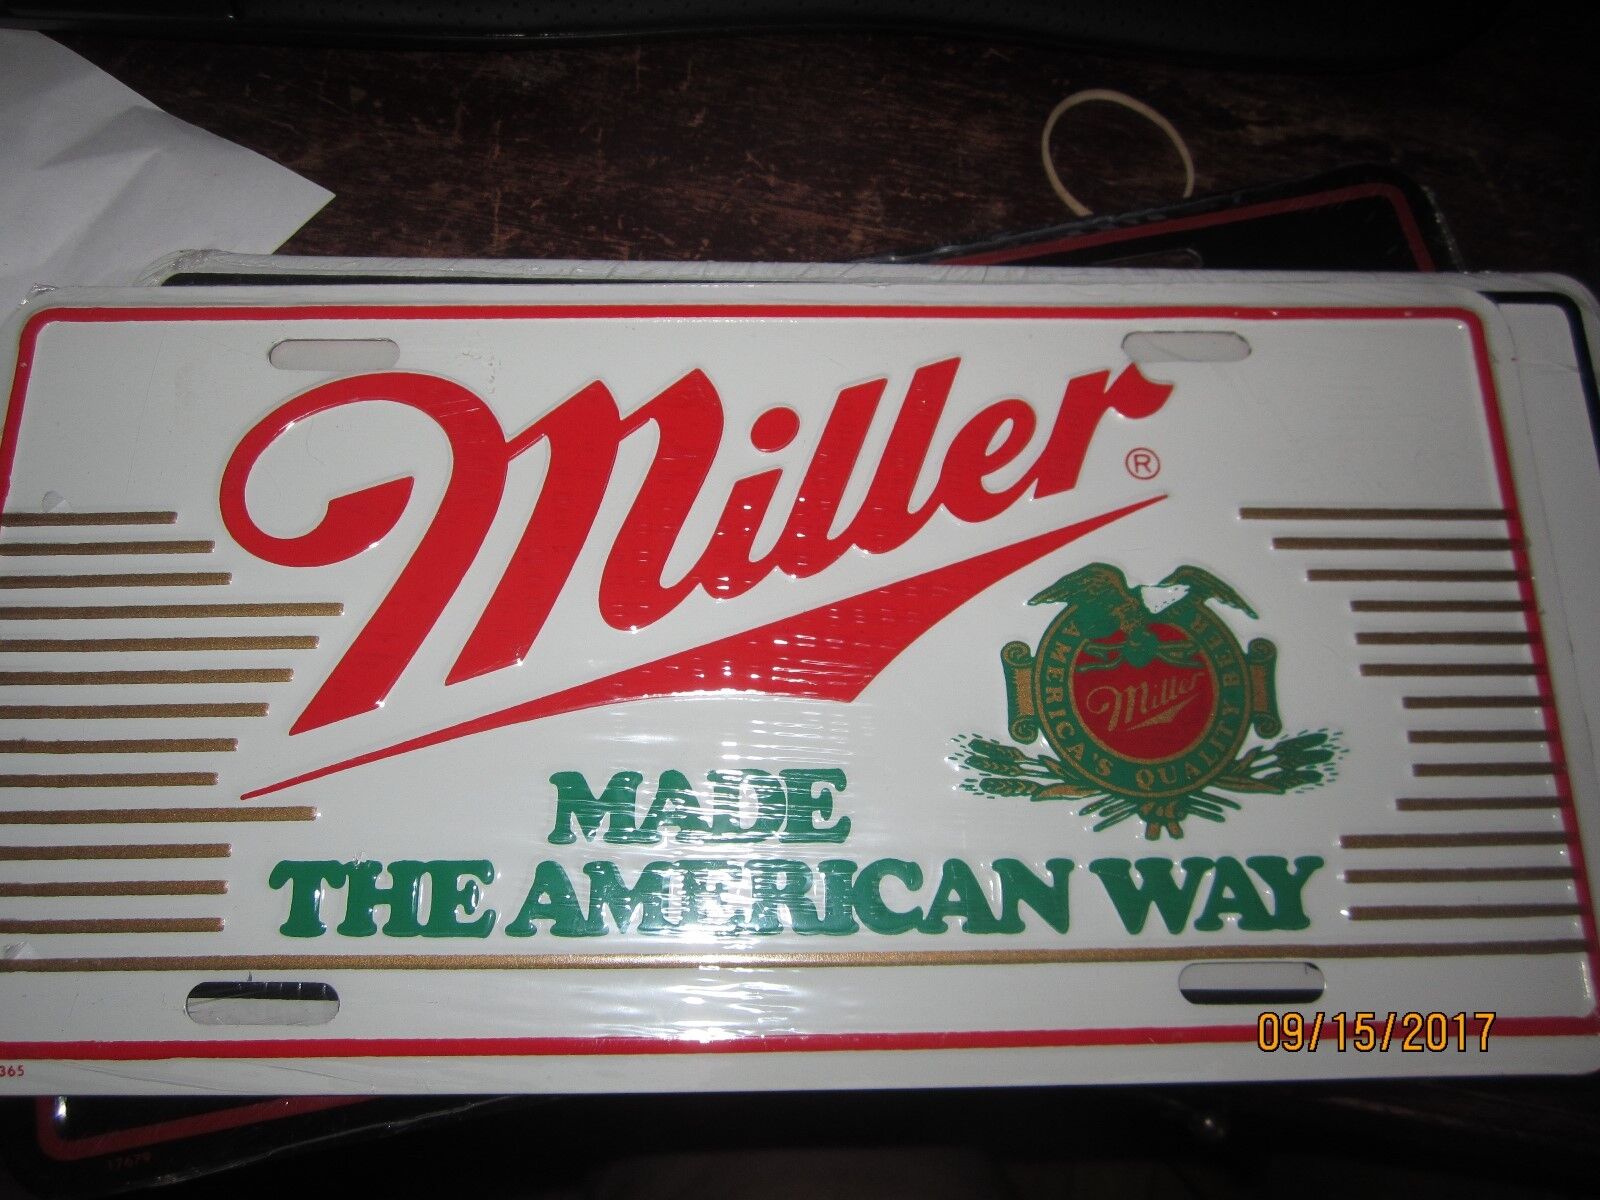  MILLER BEER MADE THE AMERICAN WAY FULL SIZE  LICENSE  PLATE  